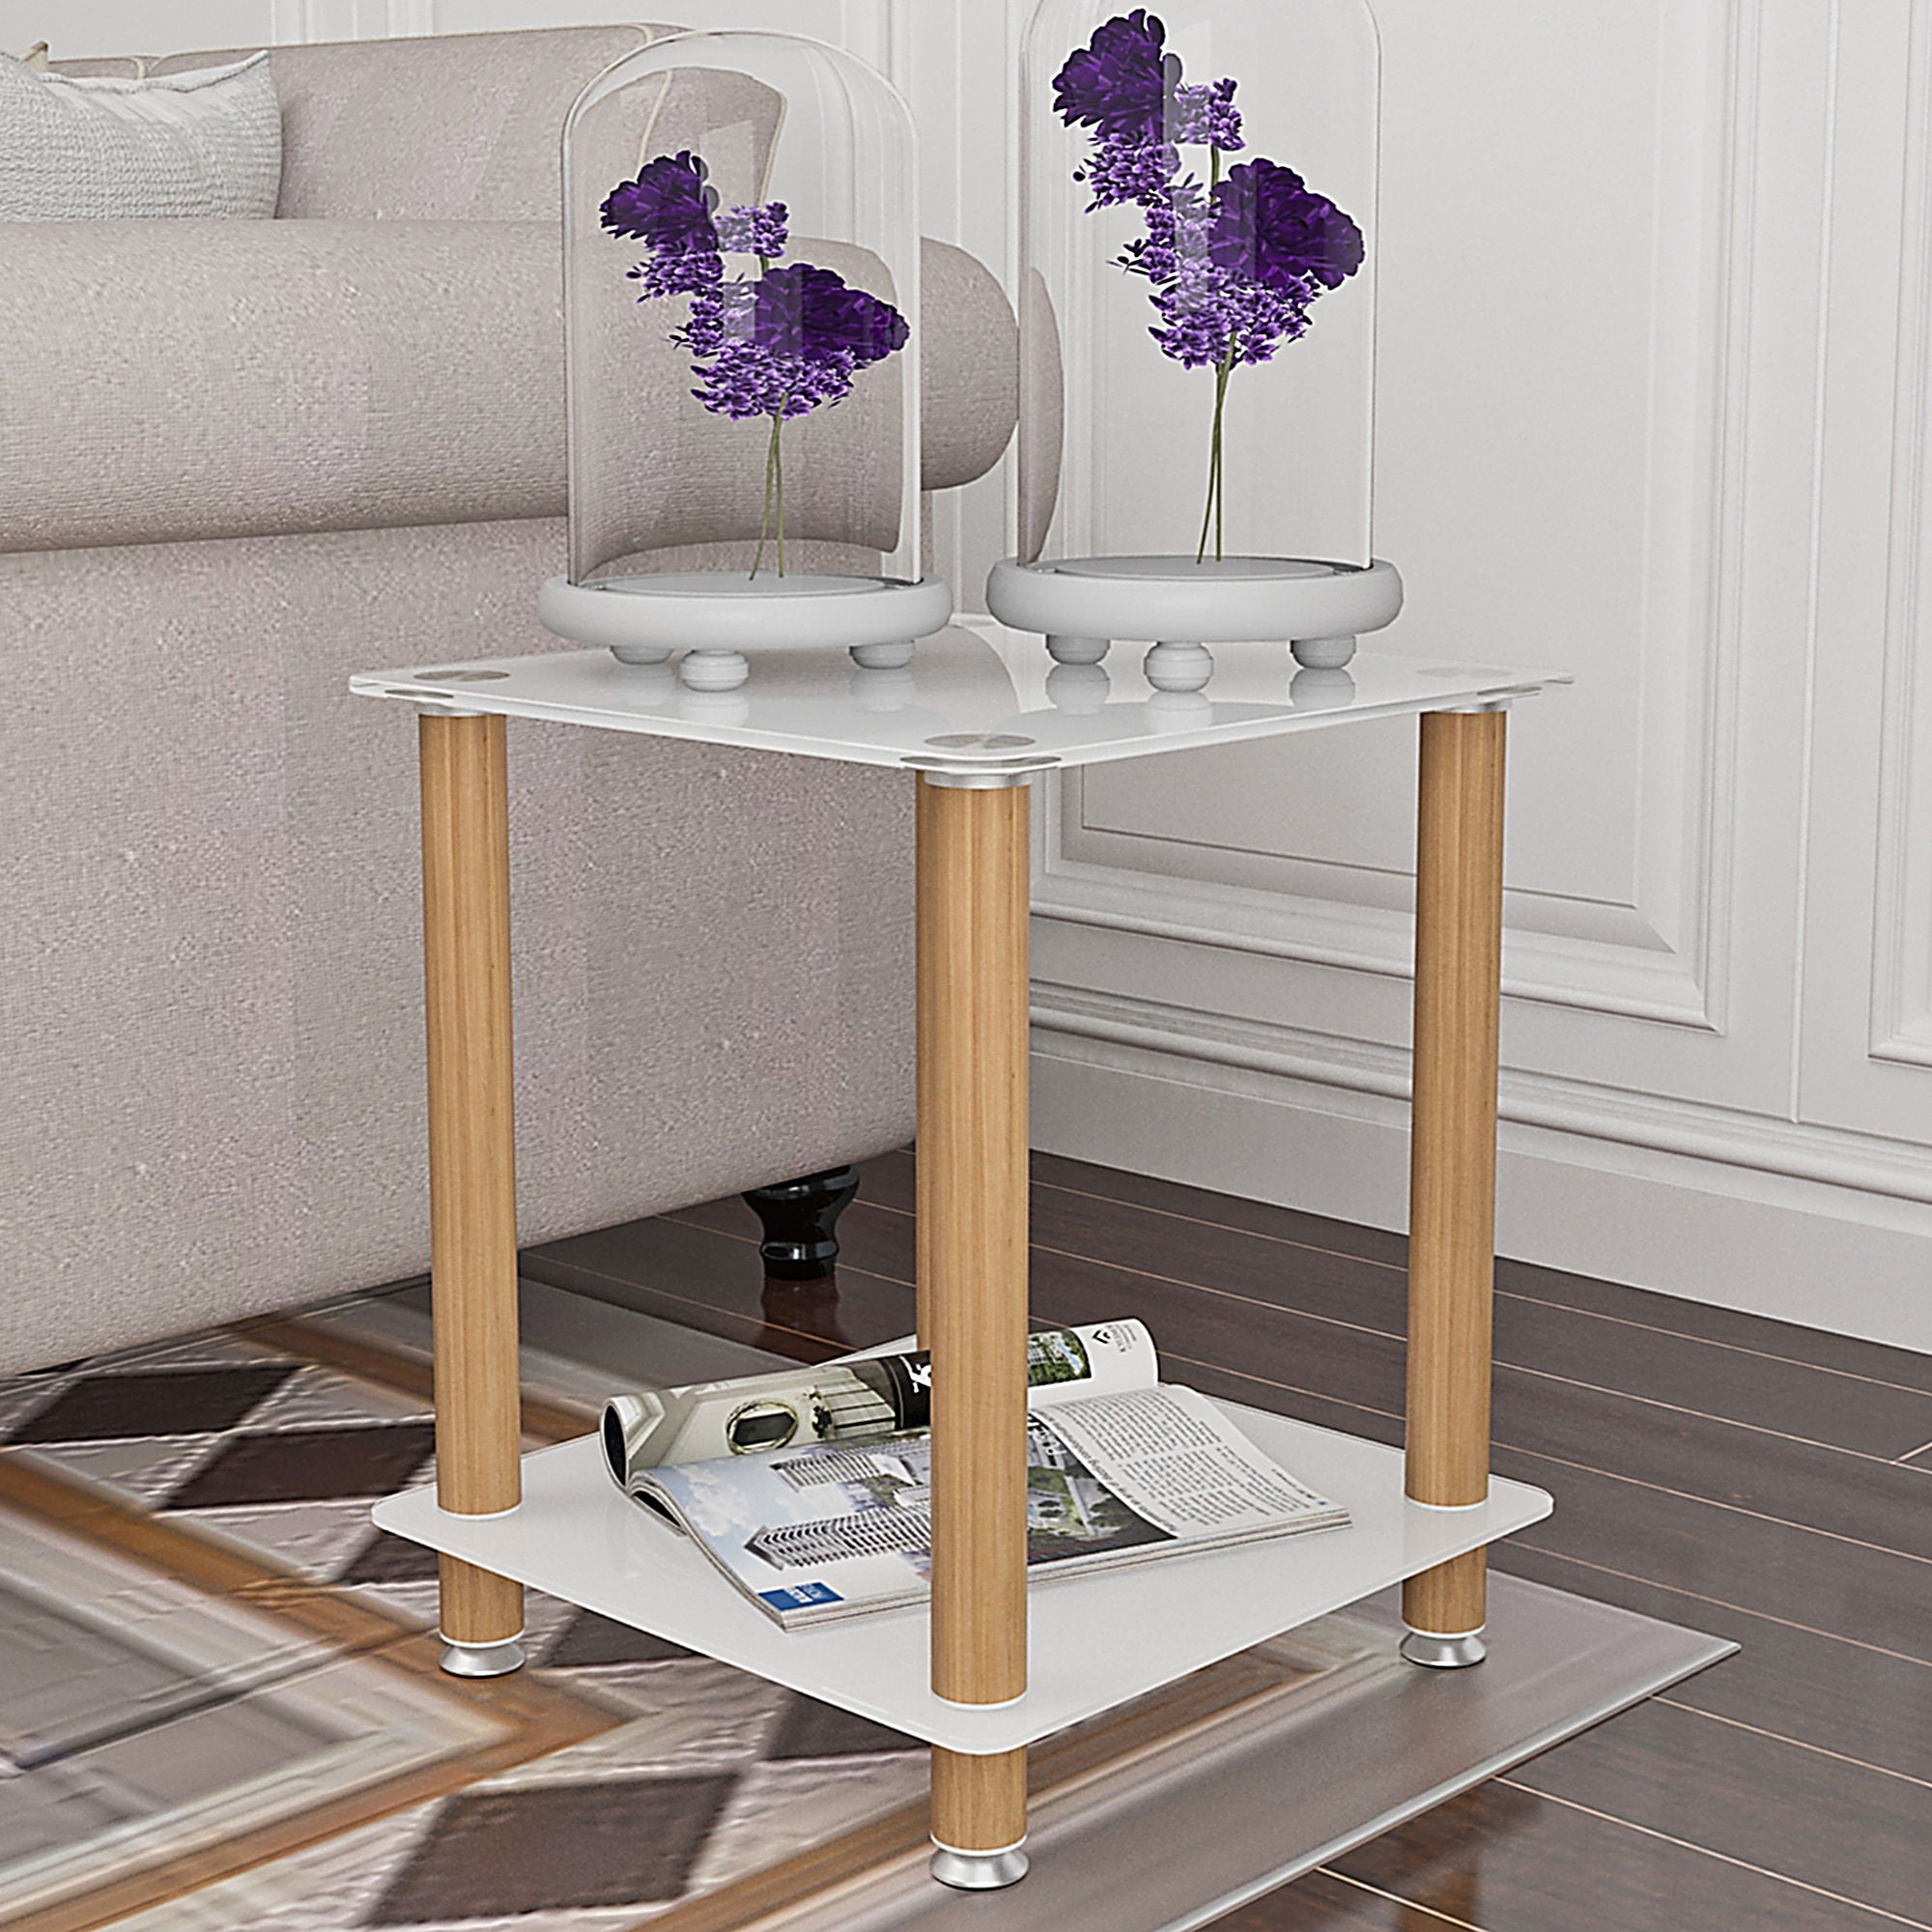 1 Piece White And Oak Side Table, 2-Tier Space End Table, Modern Night Stand, Sofa Table, Side Table With Storage Shelve